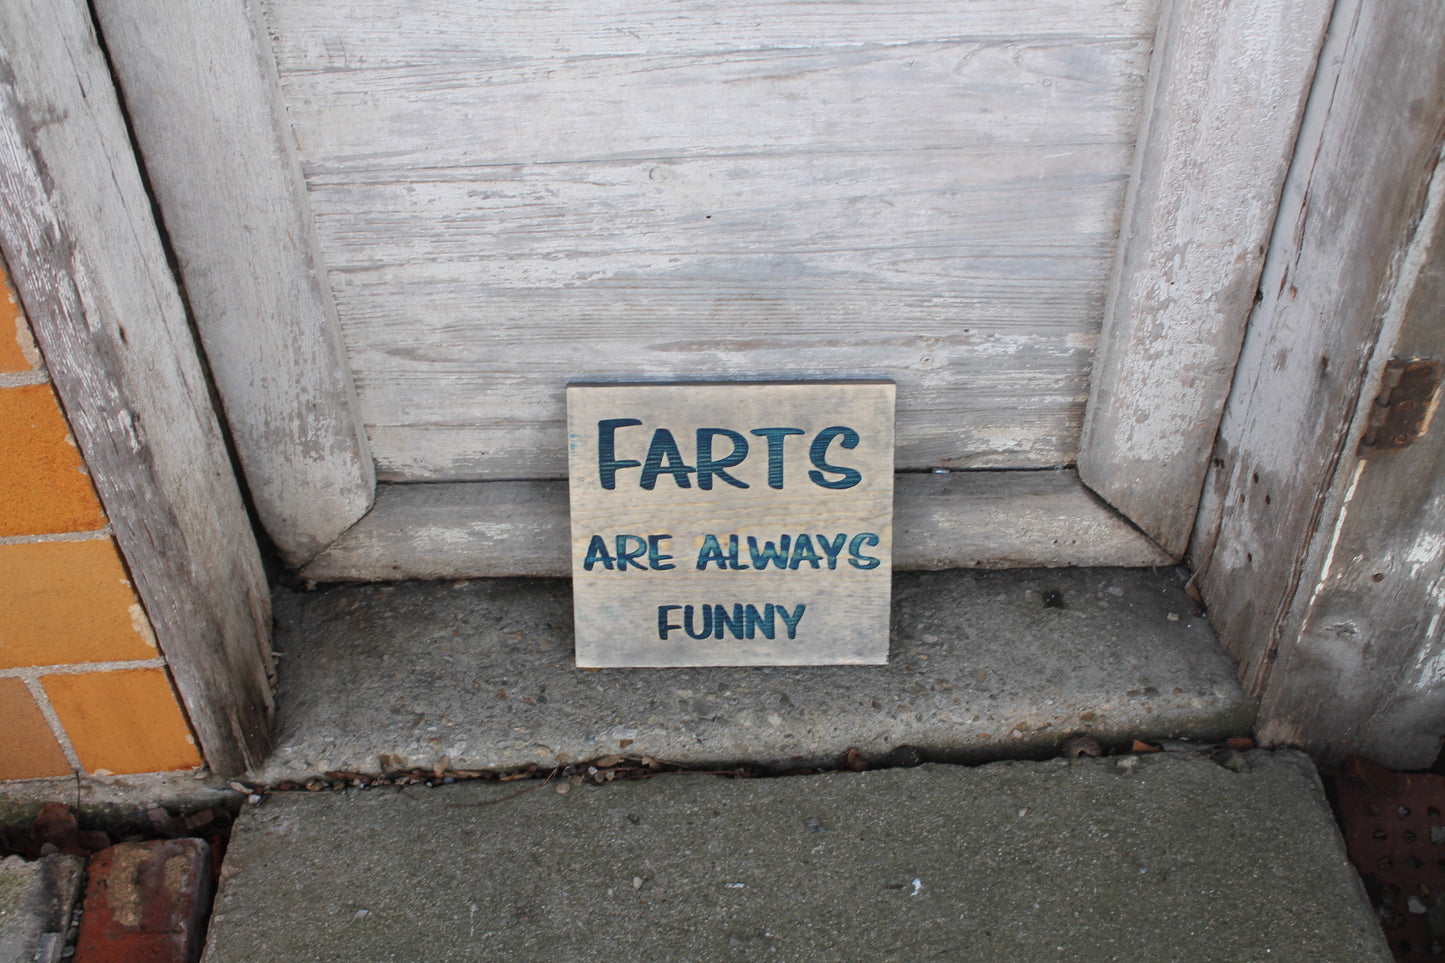 Funny, Bathroom, Sign, Farts are Always Funny, Humor, Engraved, Rustic, Wood, Gross, Joke, Silly, Guest Bath, Decor